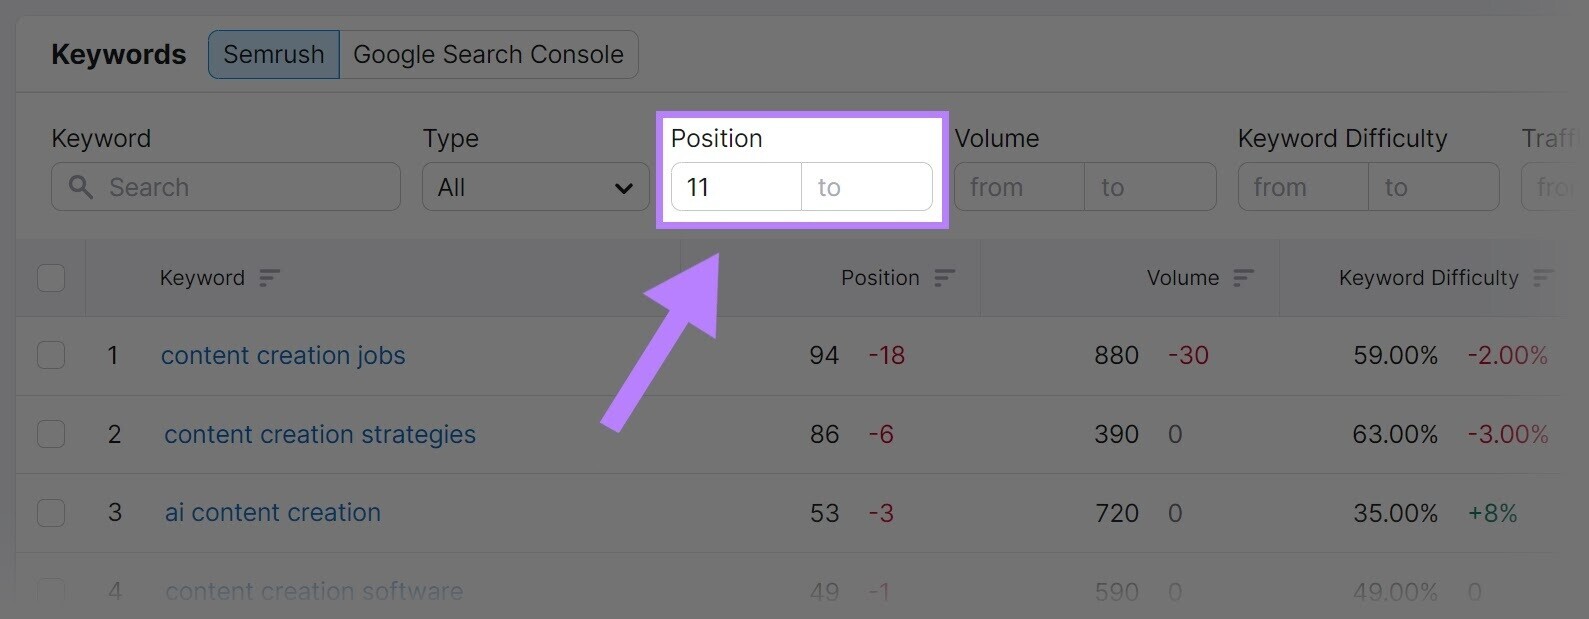 “Keywords” section on the Organic Traffic Insights tool with the "Position" filter set to 11 highlighted